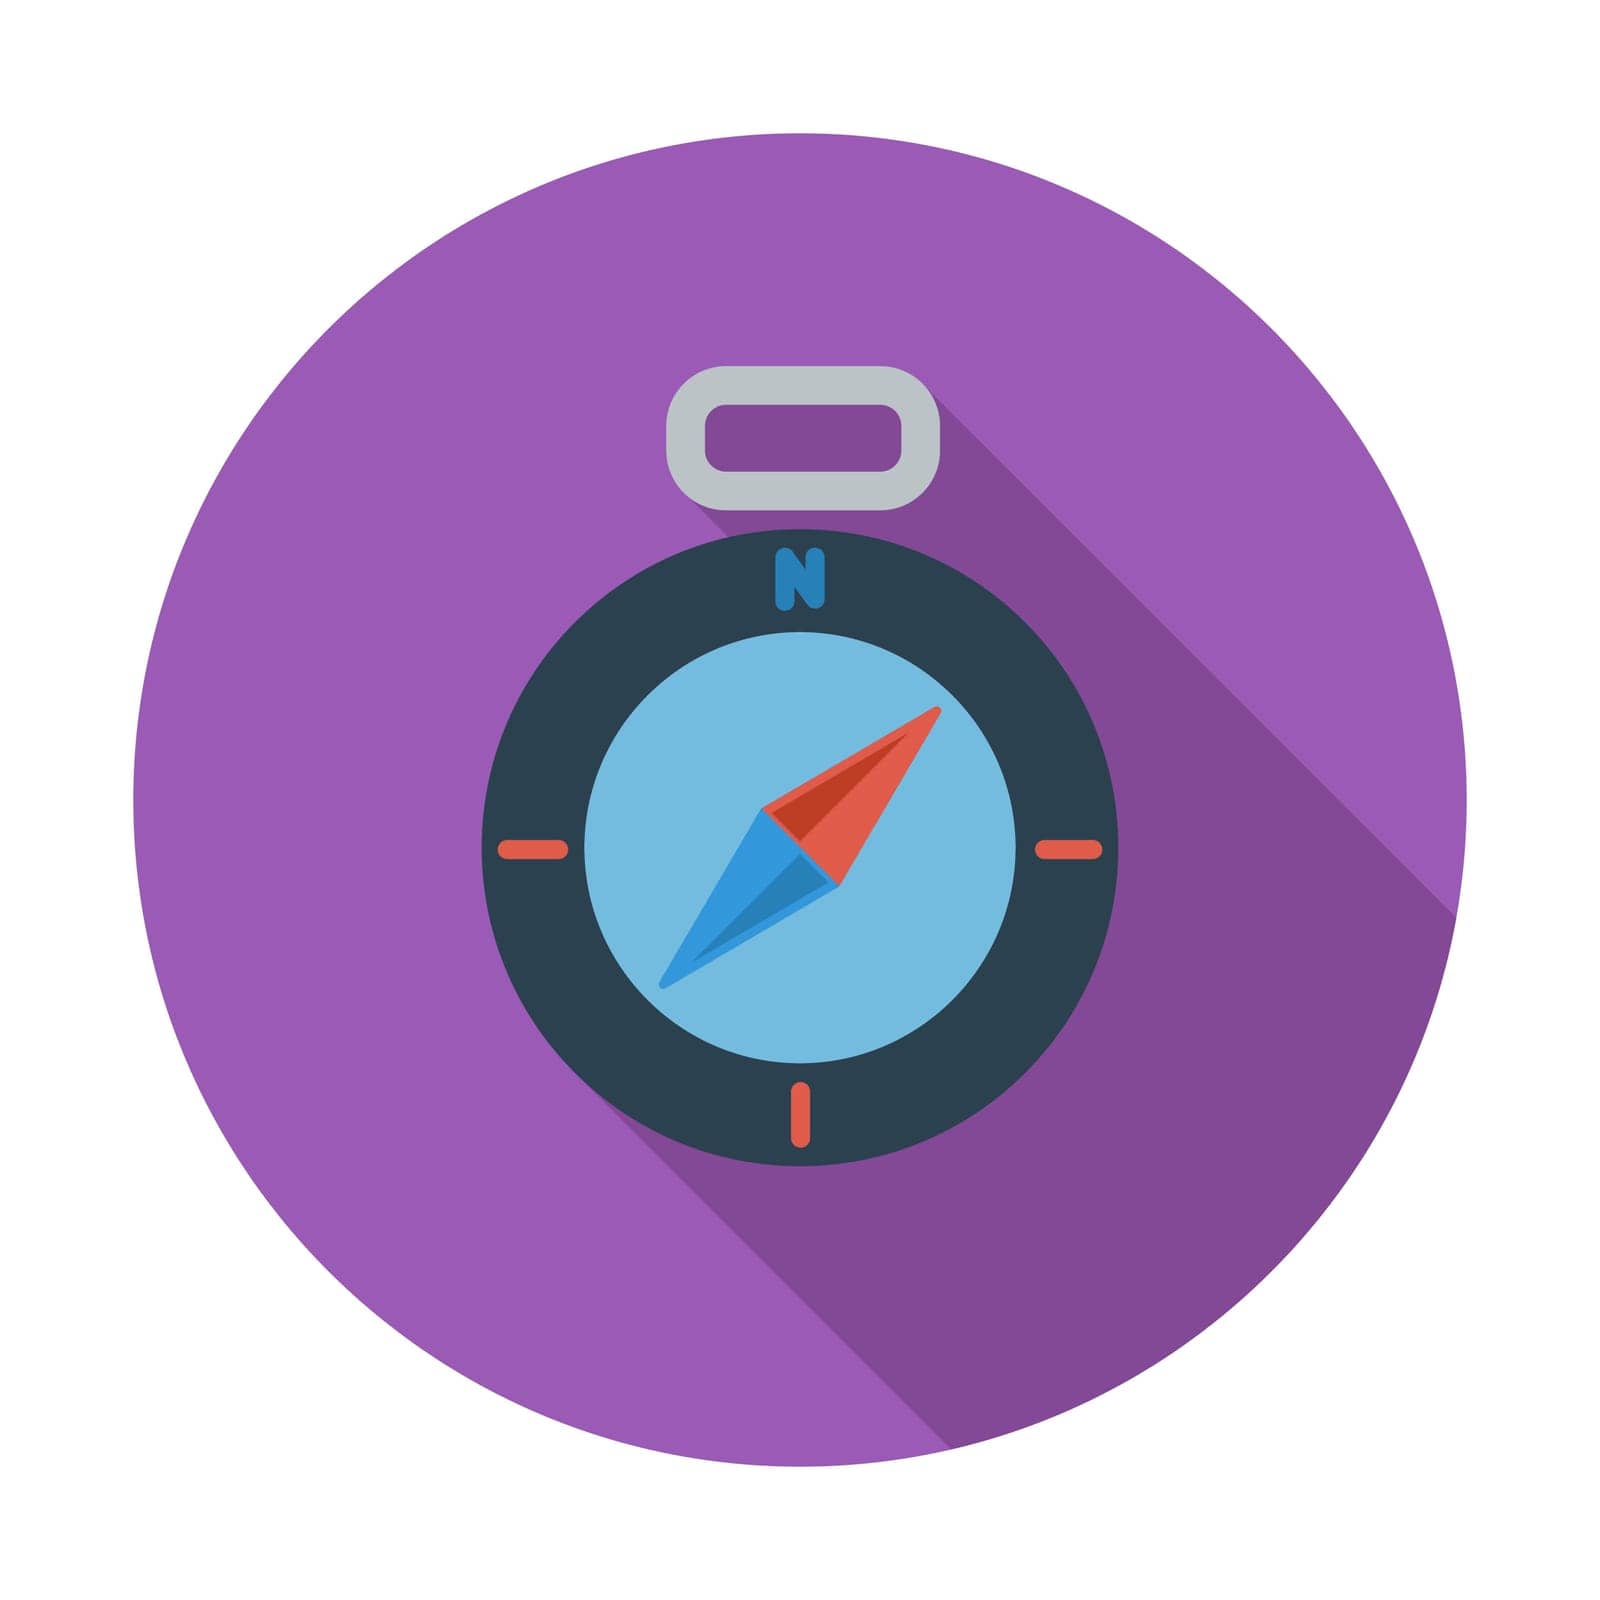 Compass. Flat vector icon for mobile and web applications. Vector illustration.